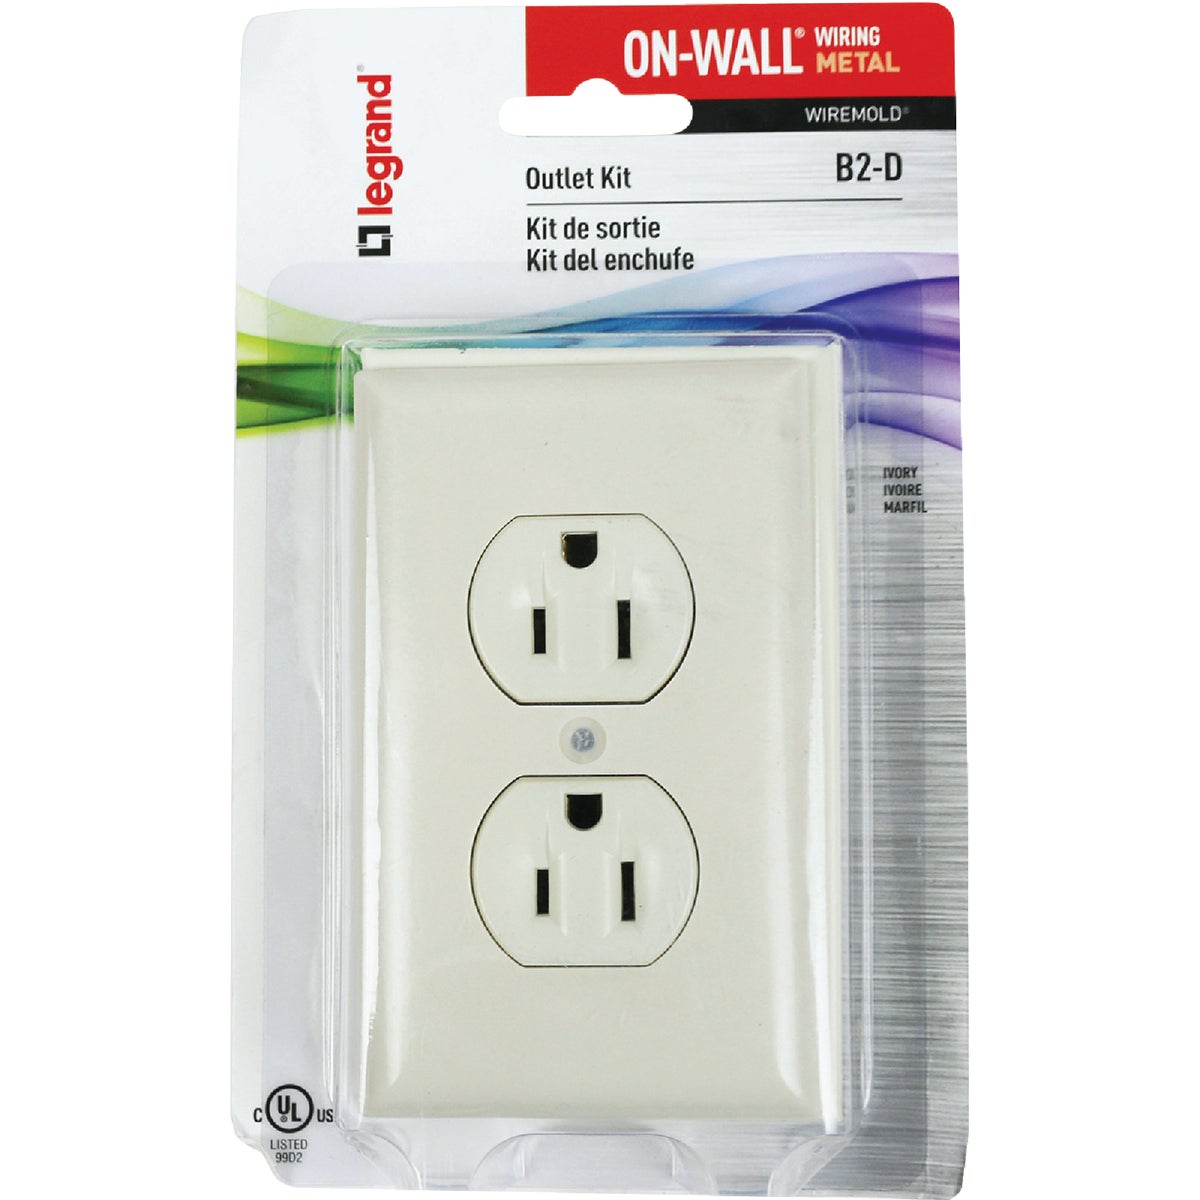 Item 562627, On-wall outlet box with matching duplex outlet and wall plate.